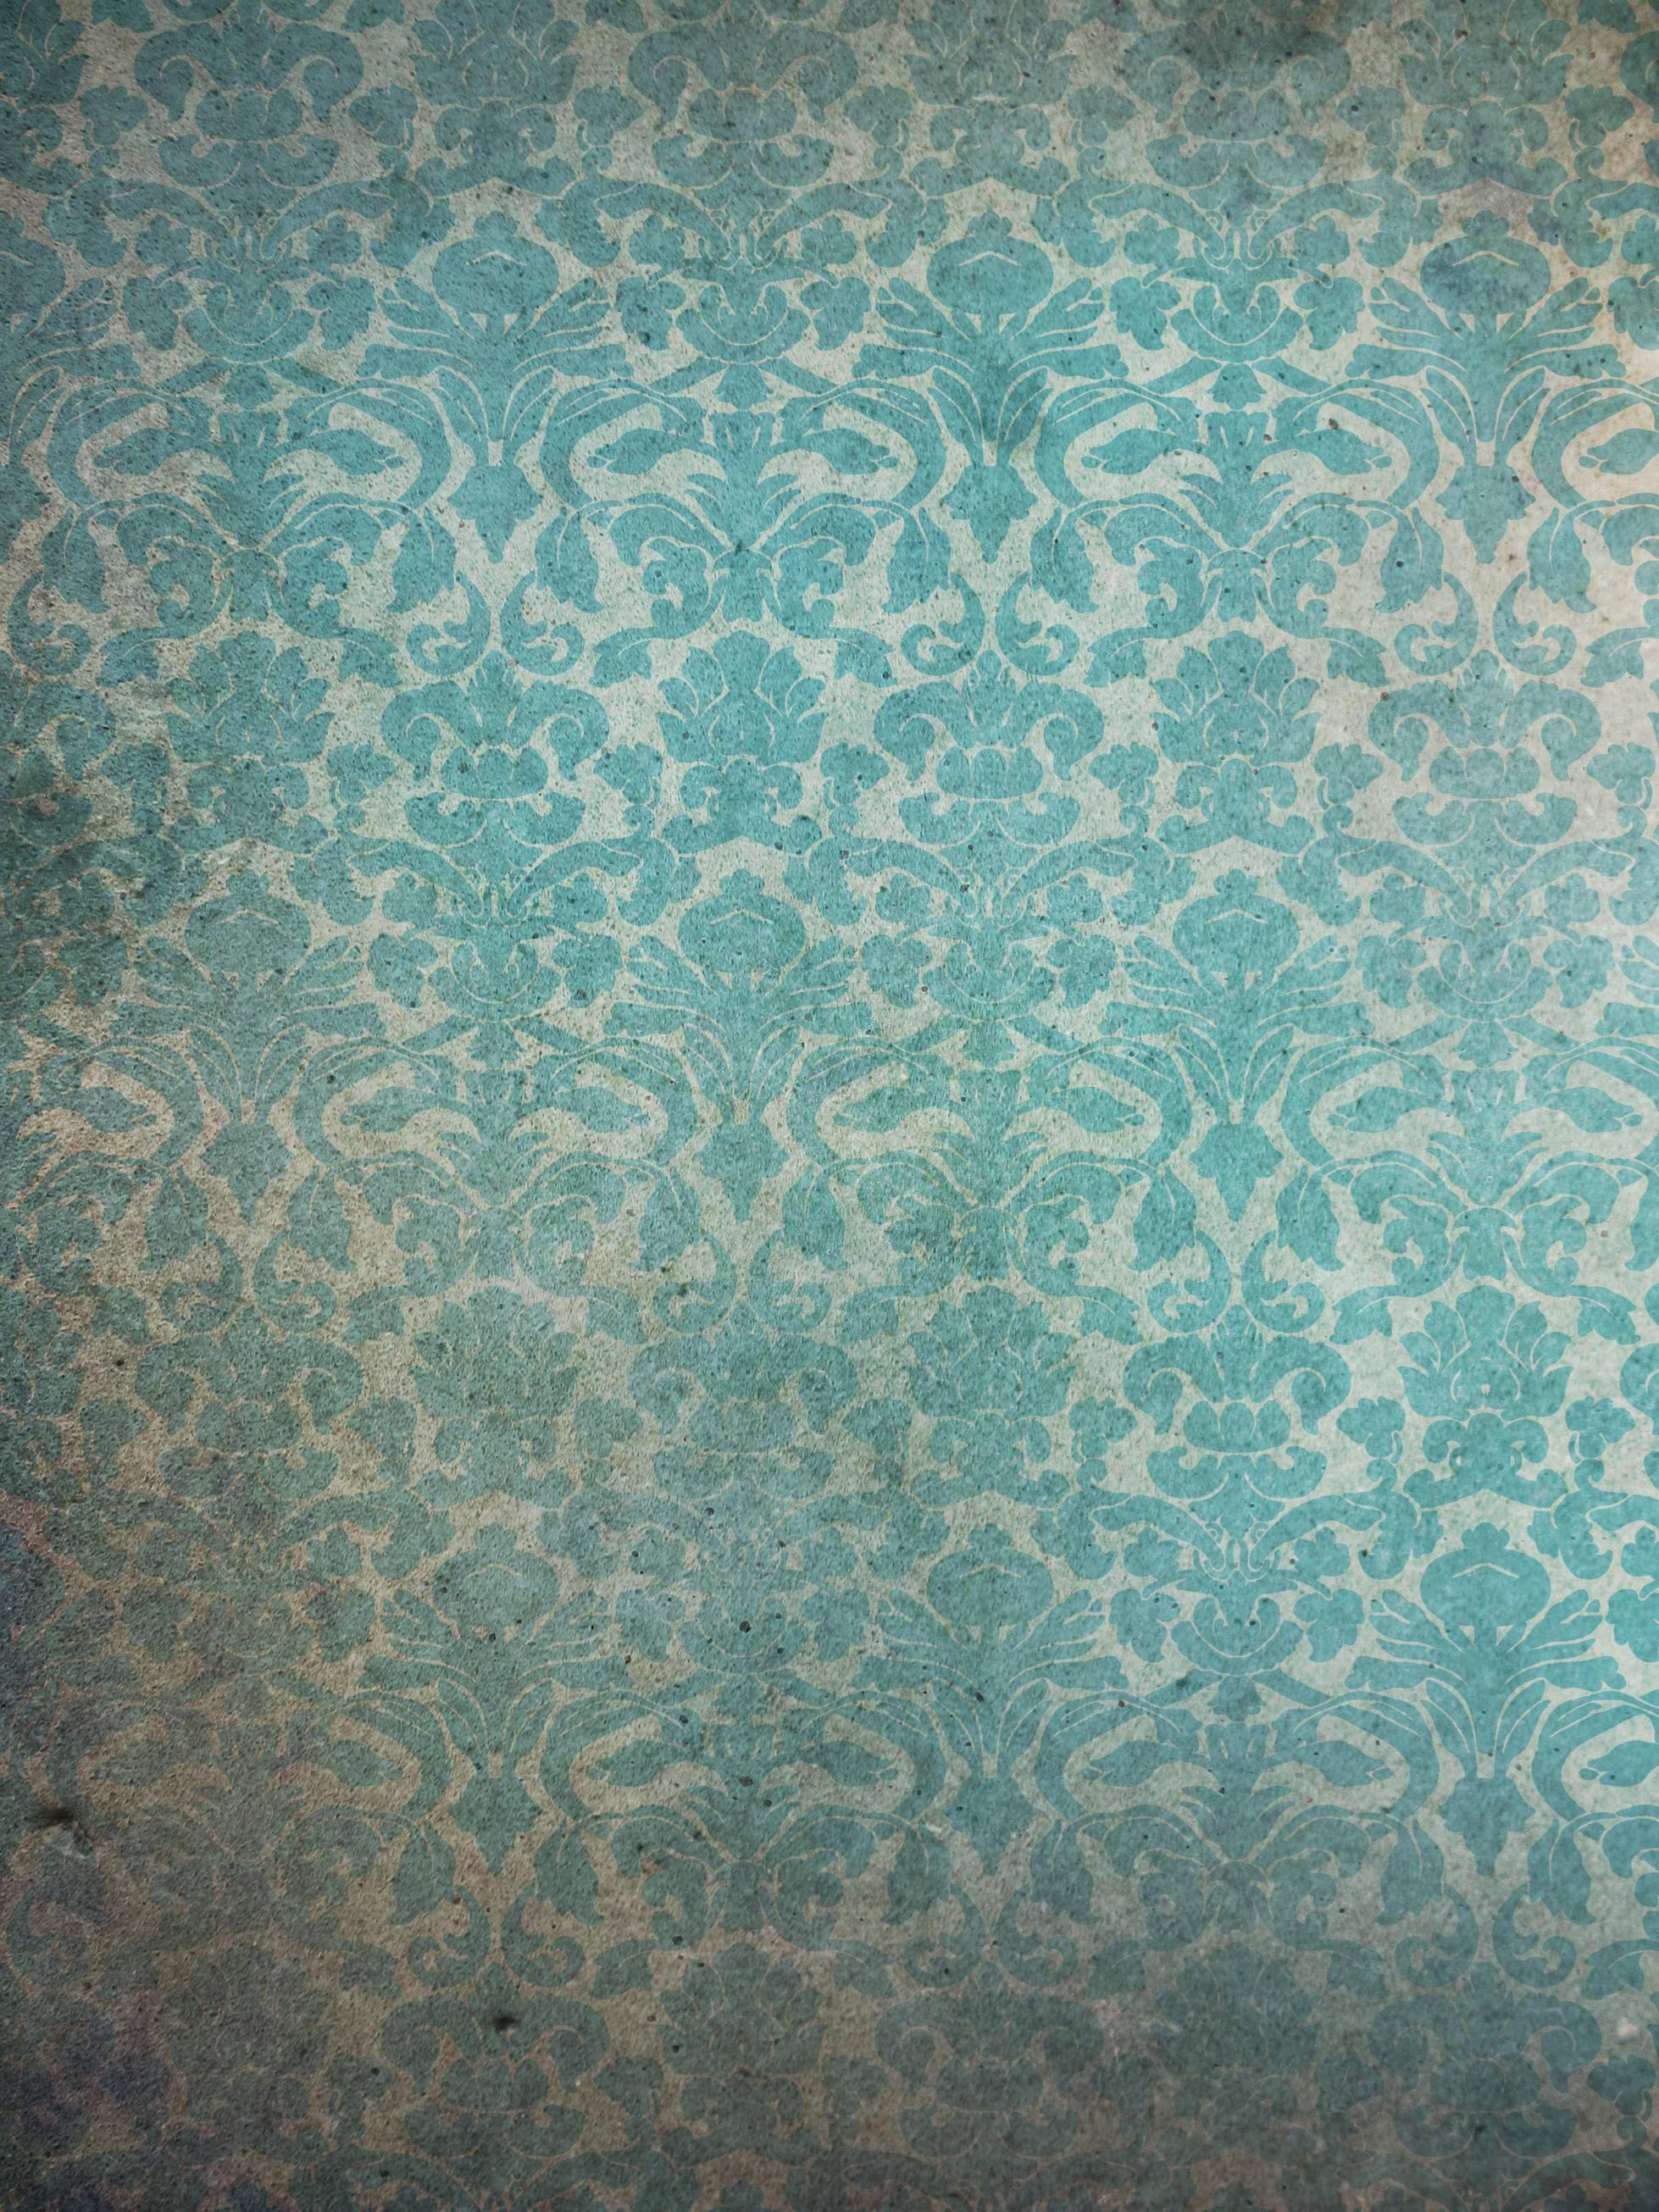 Free High Resolution Textures and Taken Wallpaper